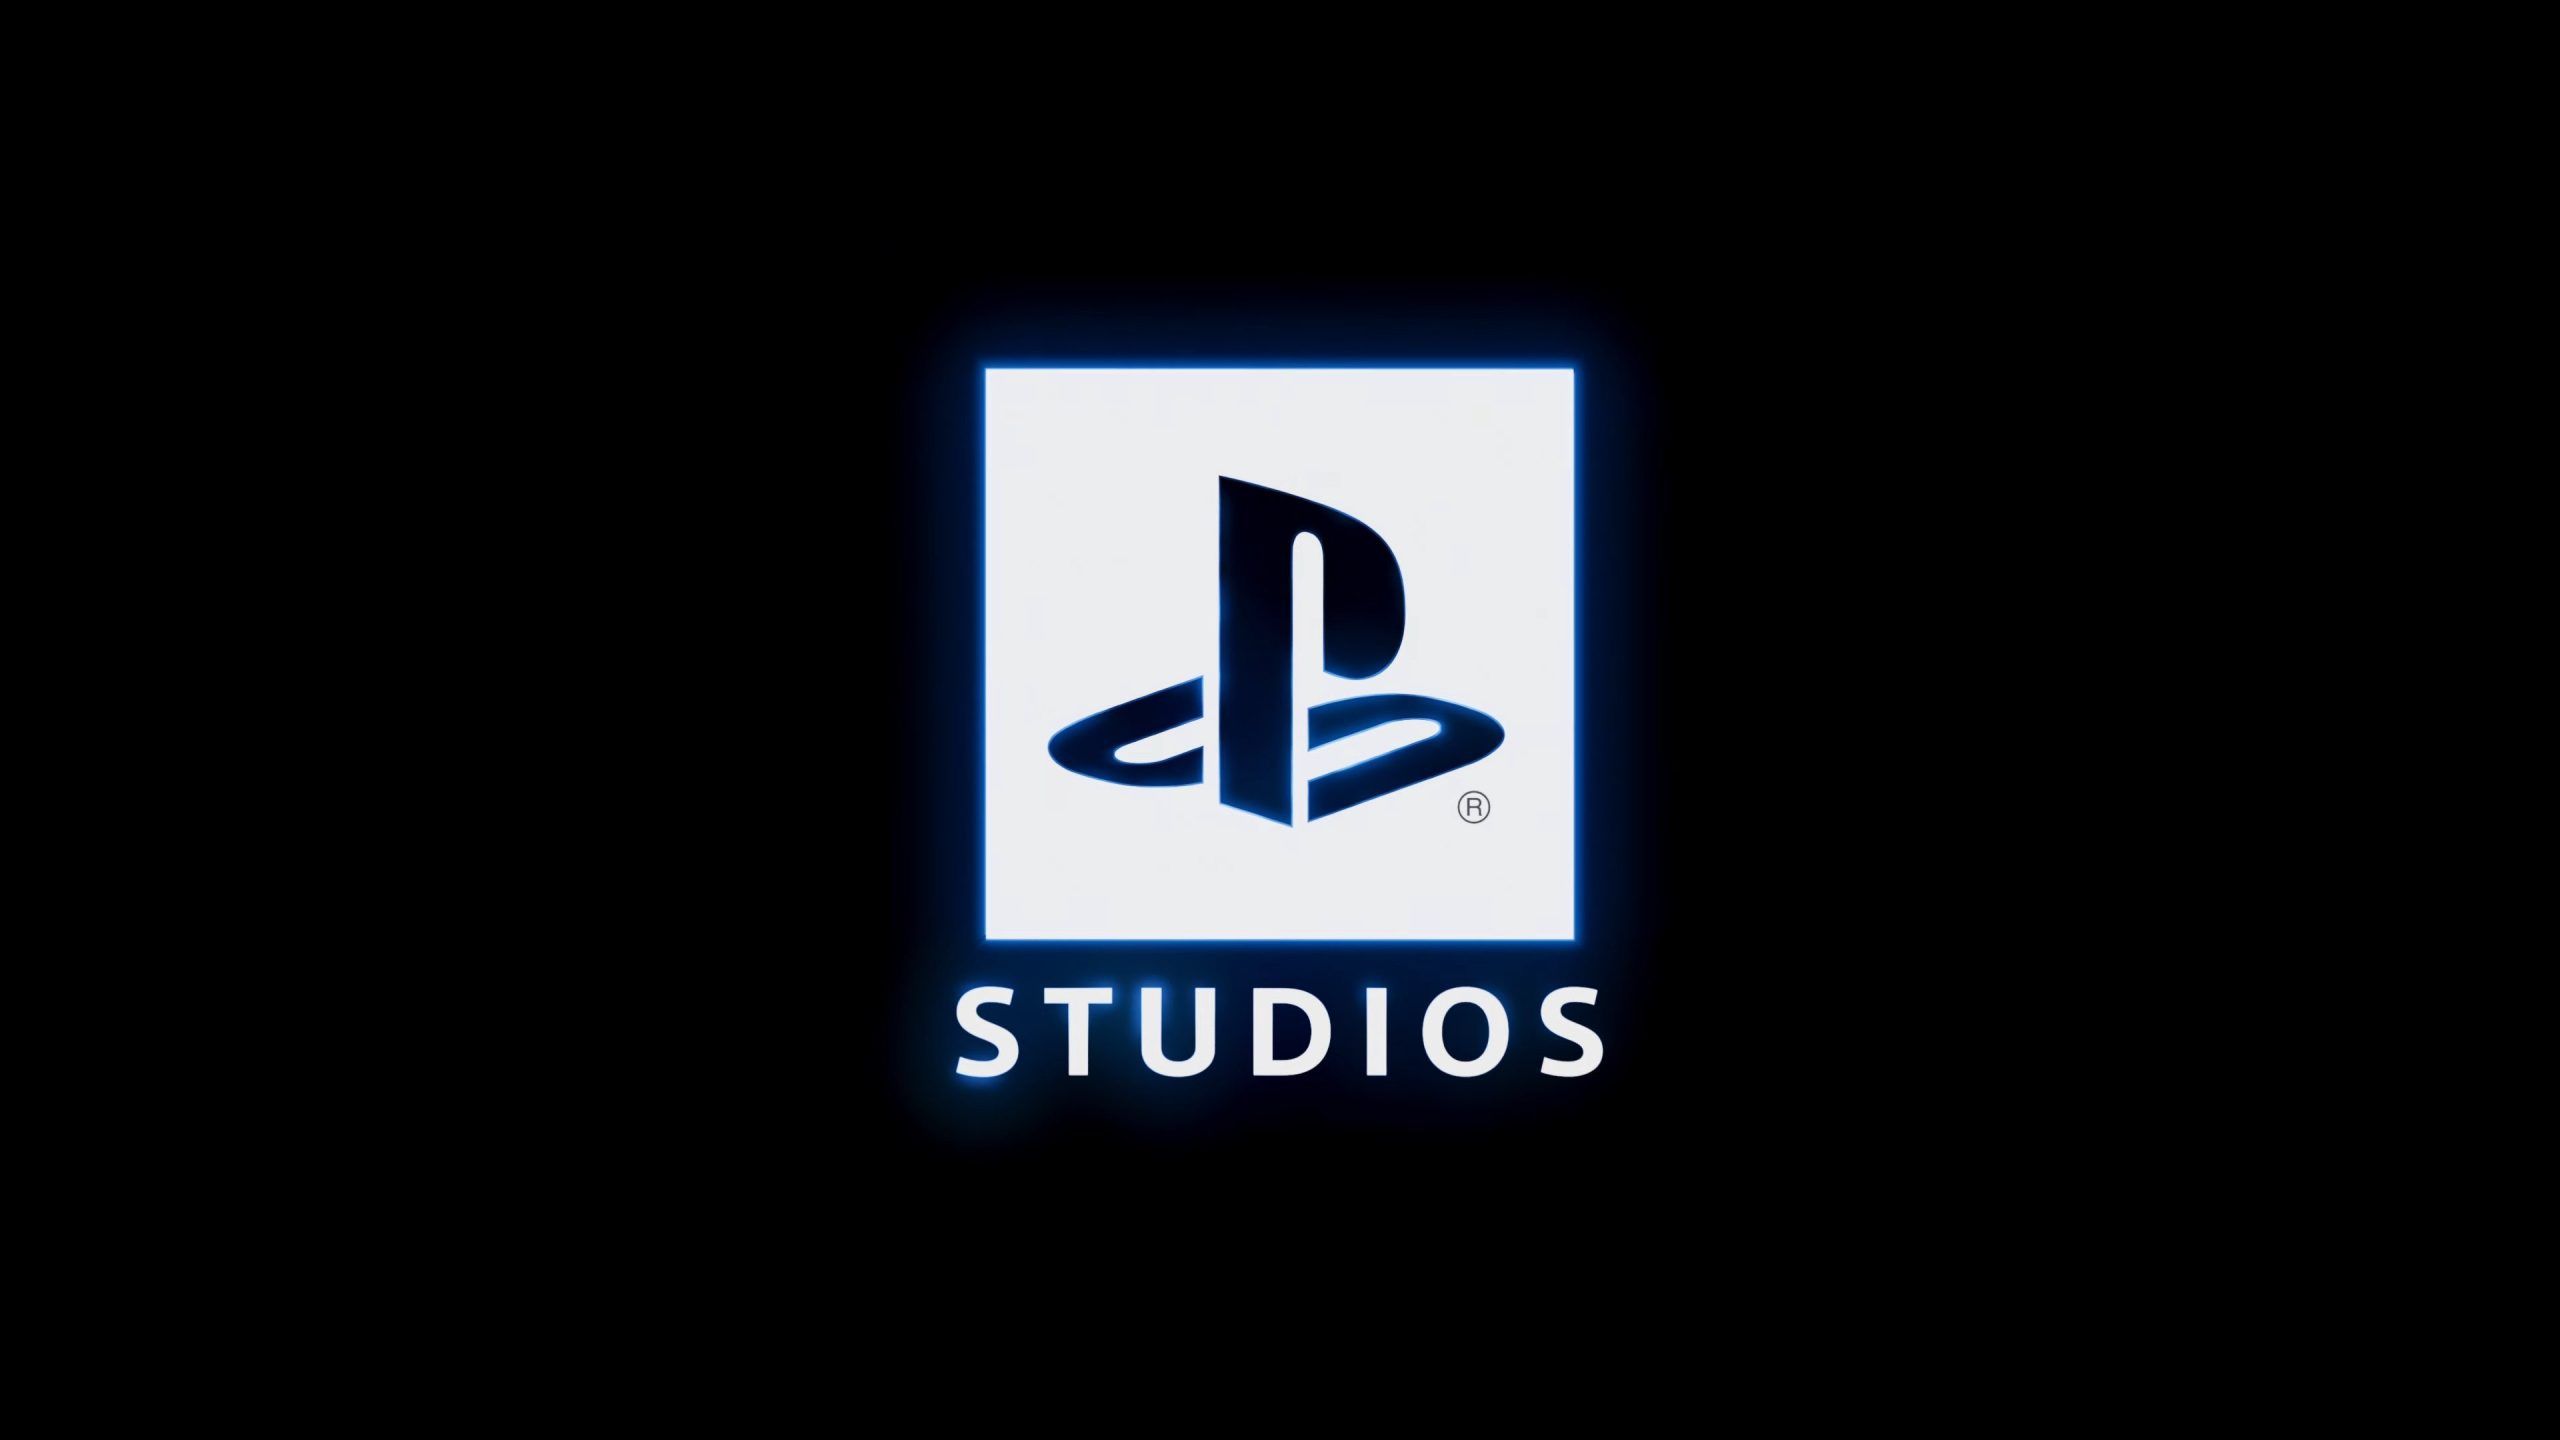 [Rumor] Sony opening a new studio in Japan to develop AAA video games